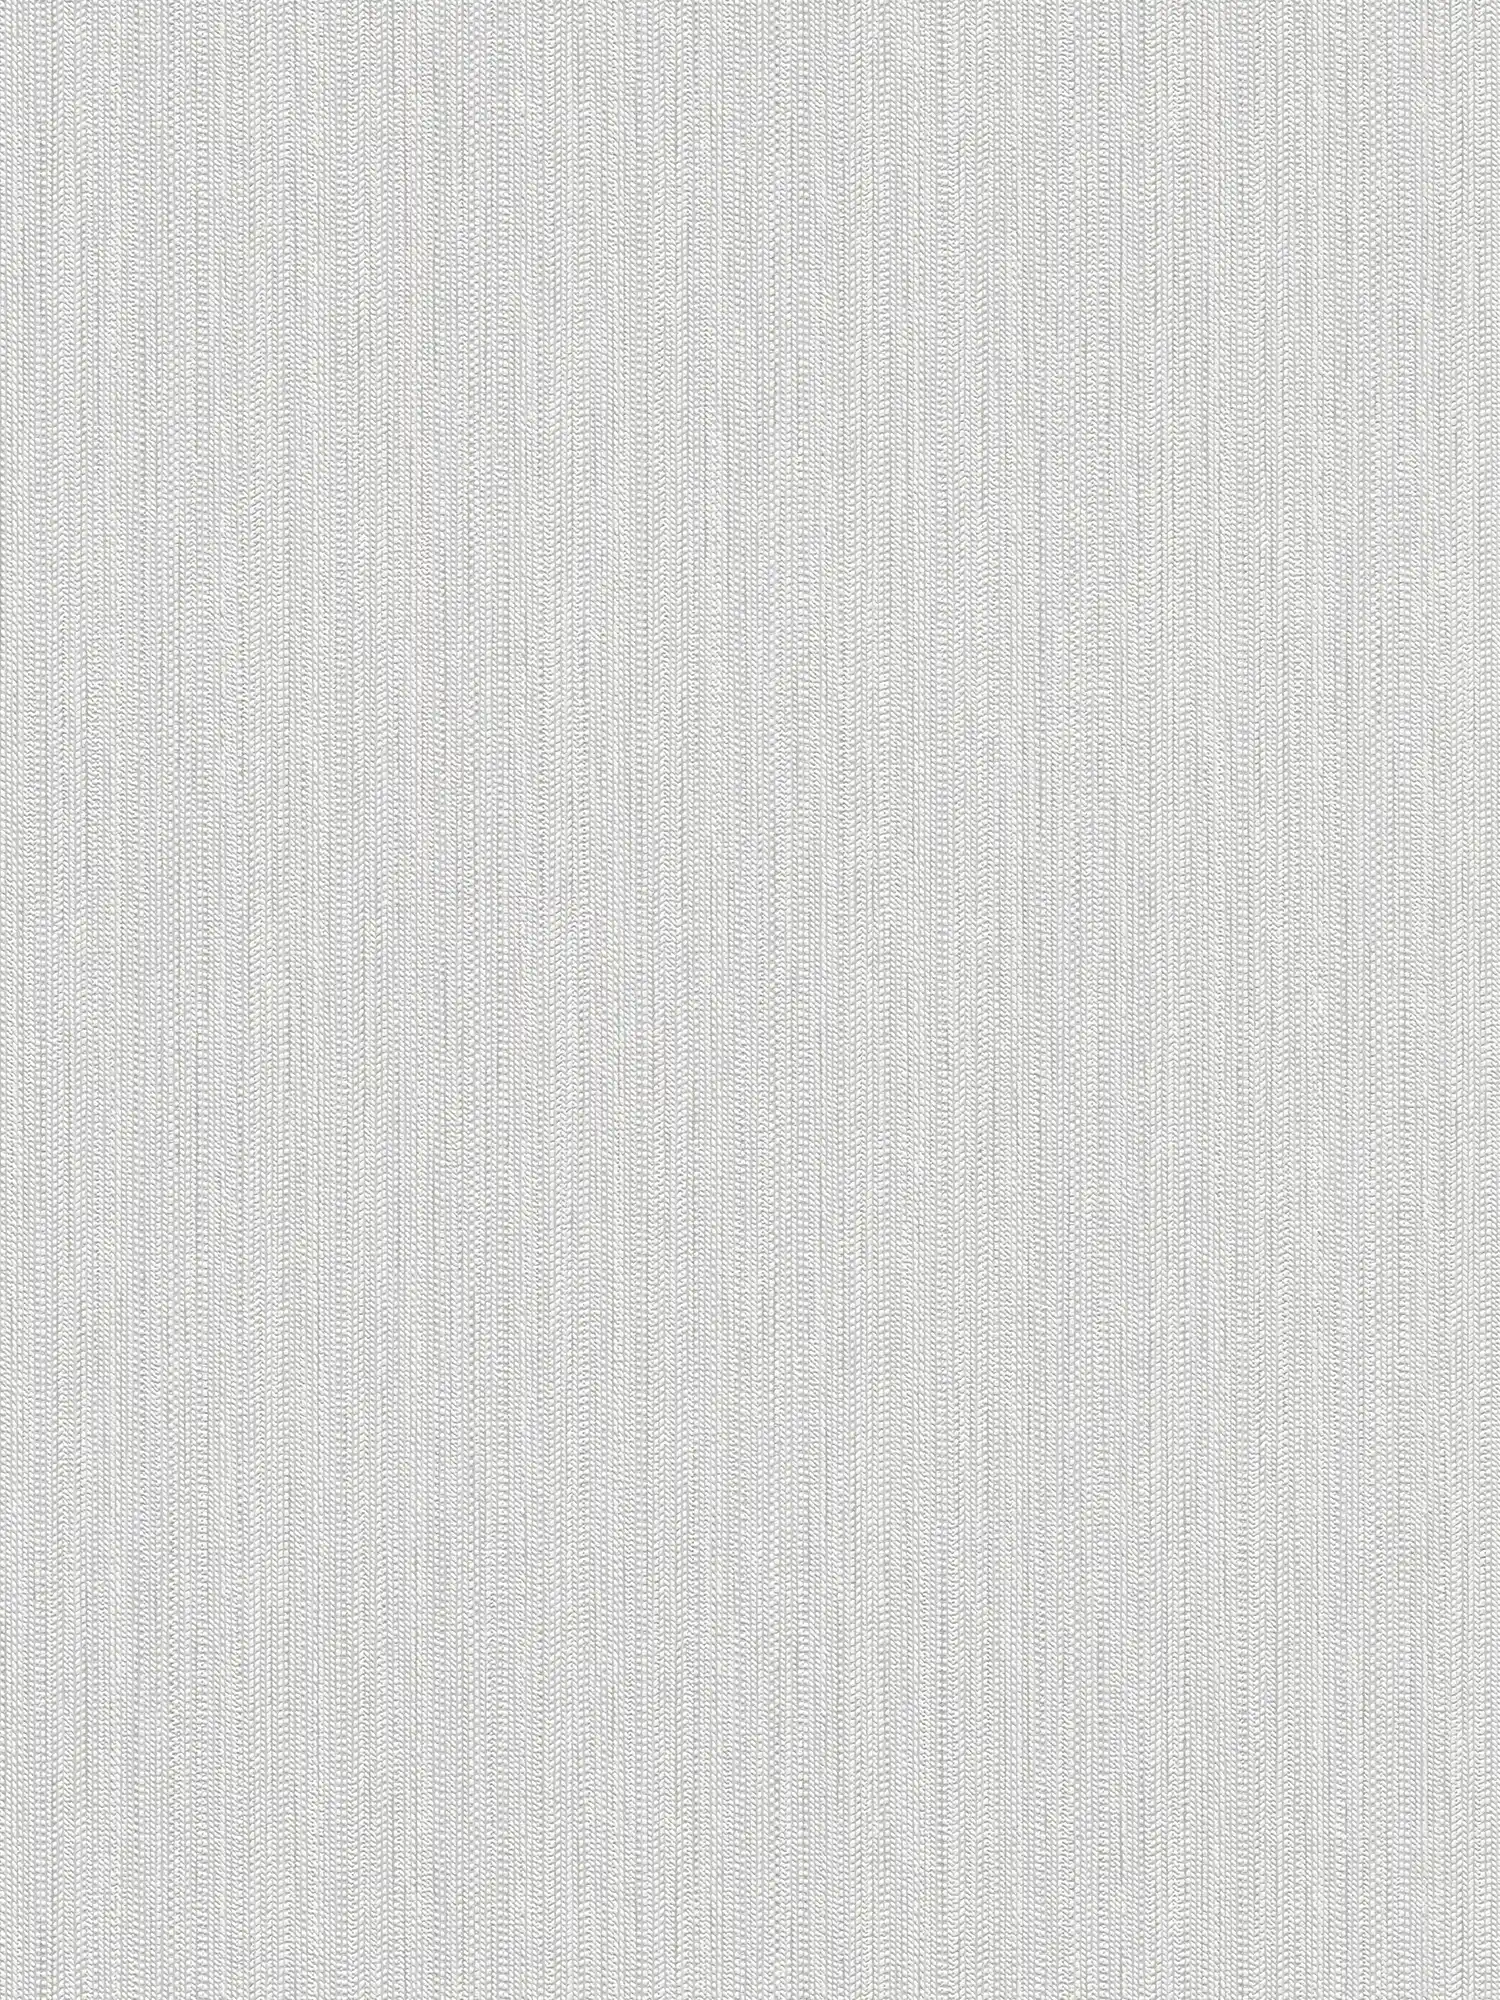 Non-woven wallpaper with plait fabric structure - white, light grey
